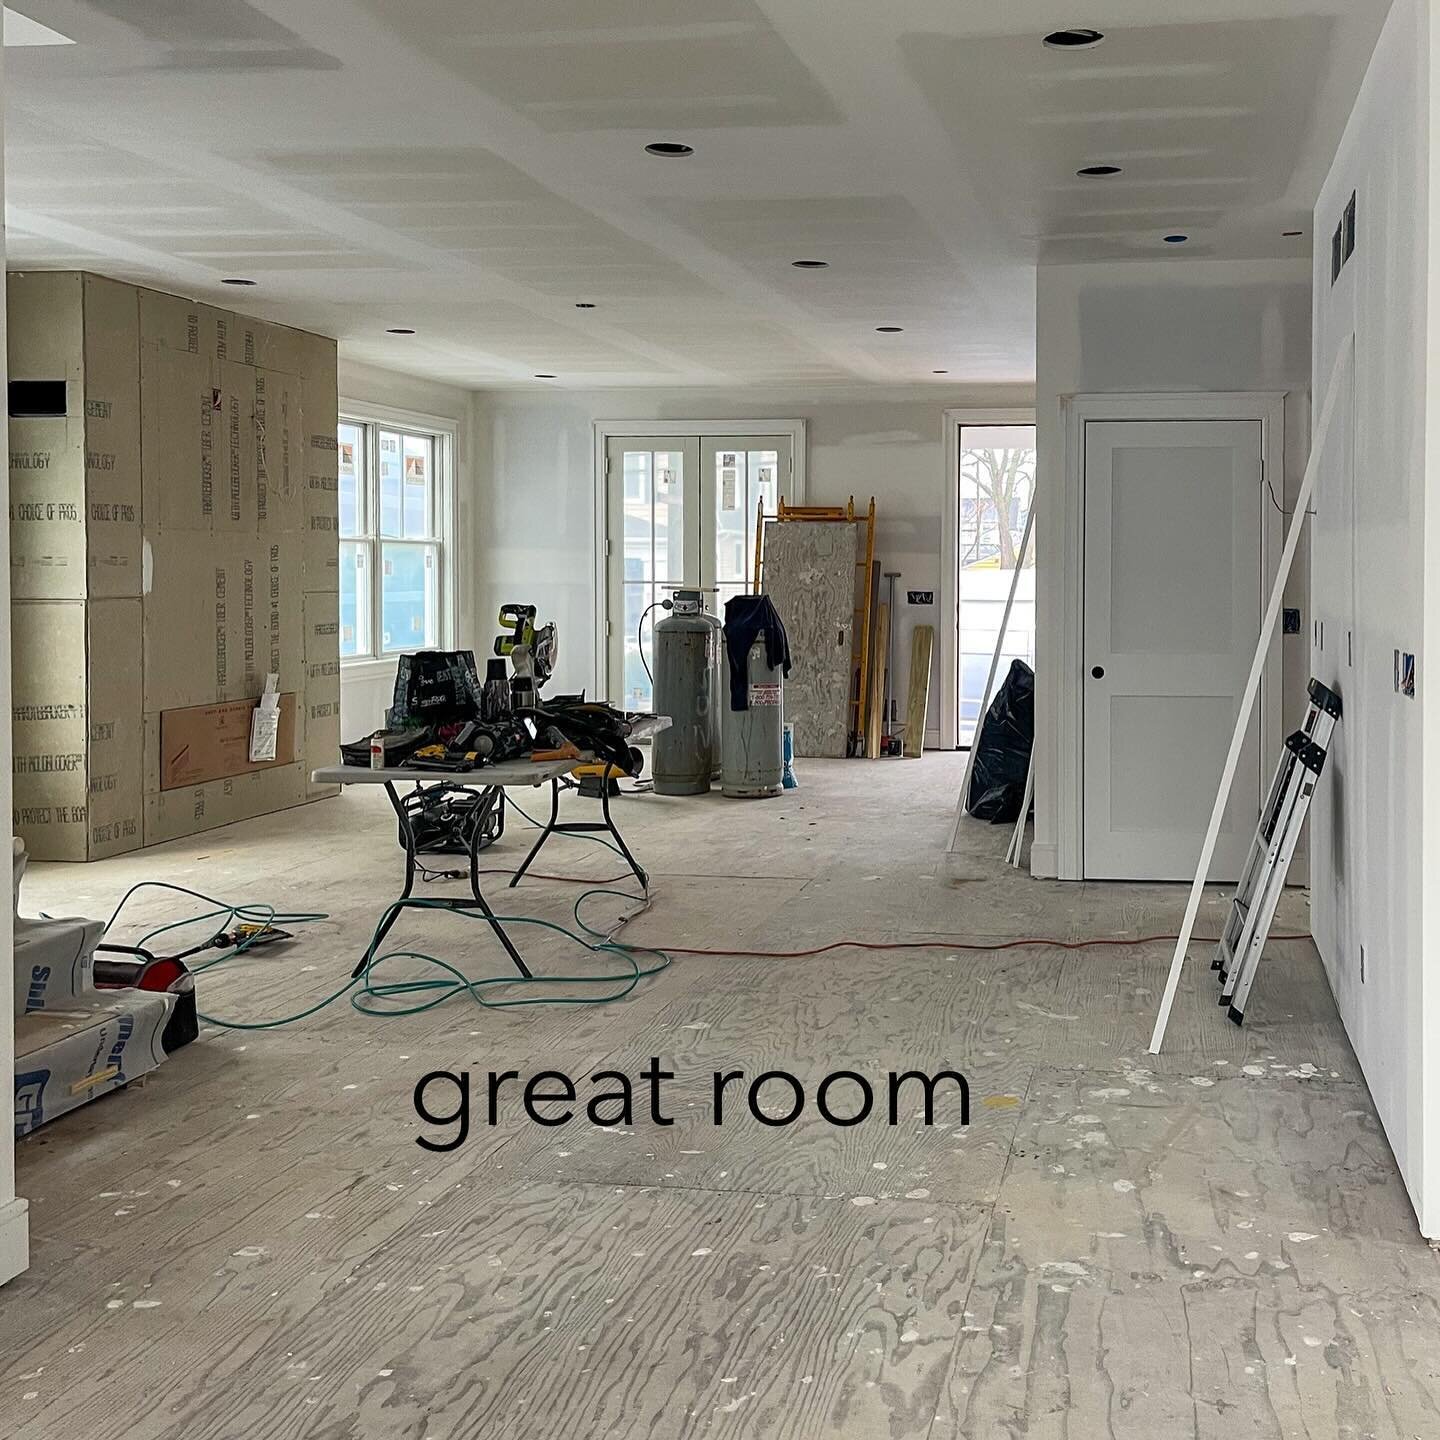 Project Update&hellip; moving along - Sheetrock complete! Hope to have our clients in for Memorial Day Weekend, the official start to summer at the Jersey Shore 🌊✨

#interiordesign #designbuild #astadesigngroup #designer #builder #designnj #jerseysh